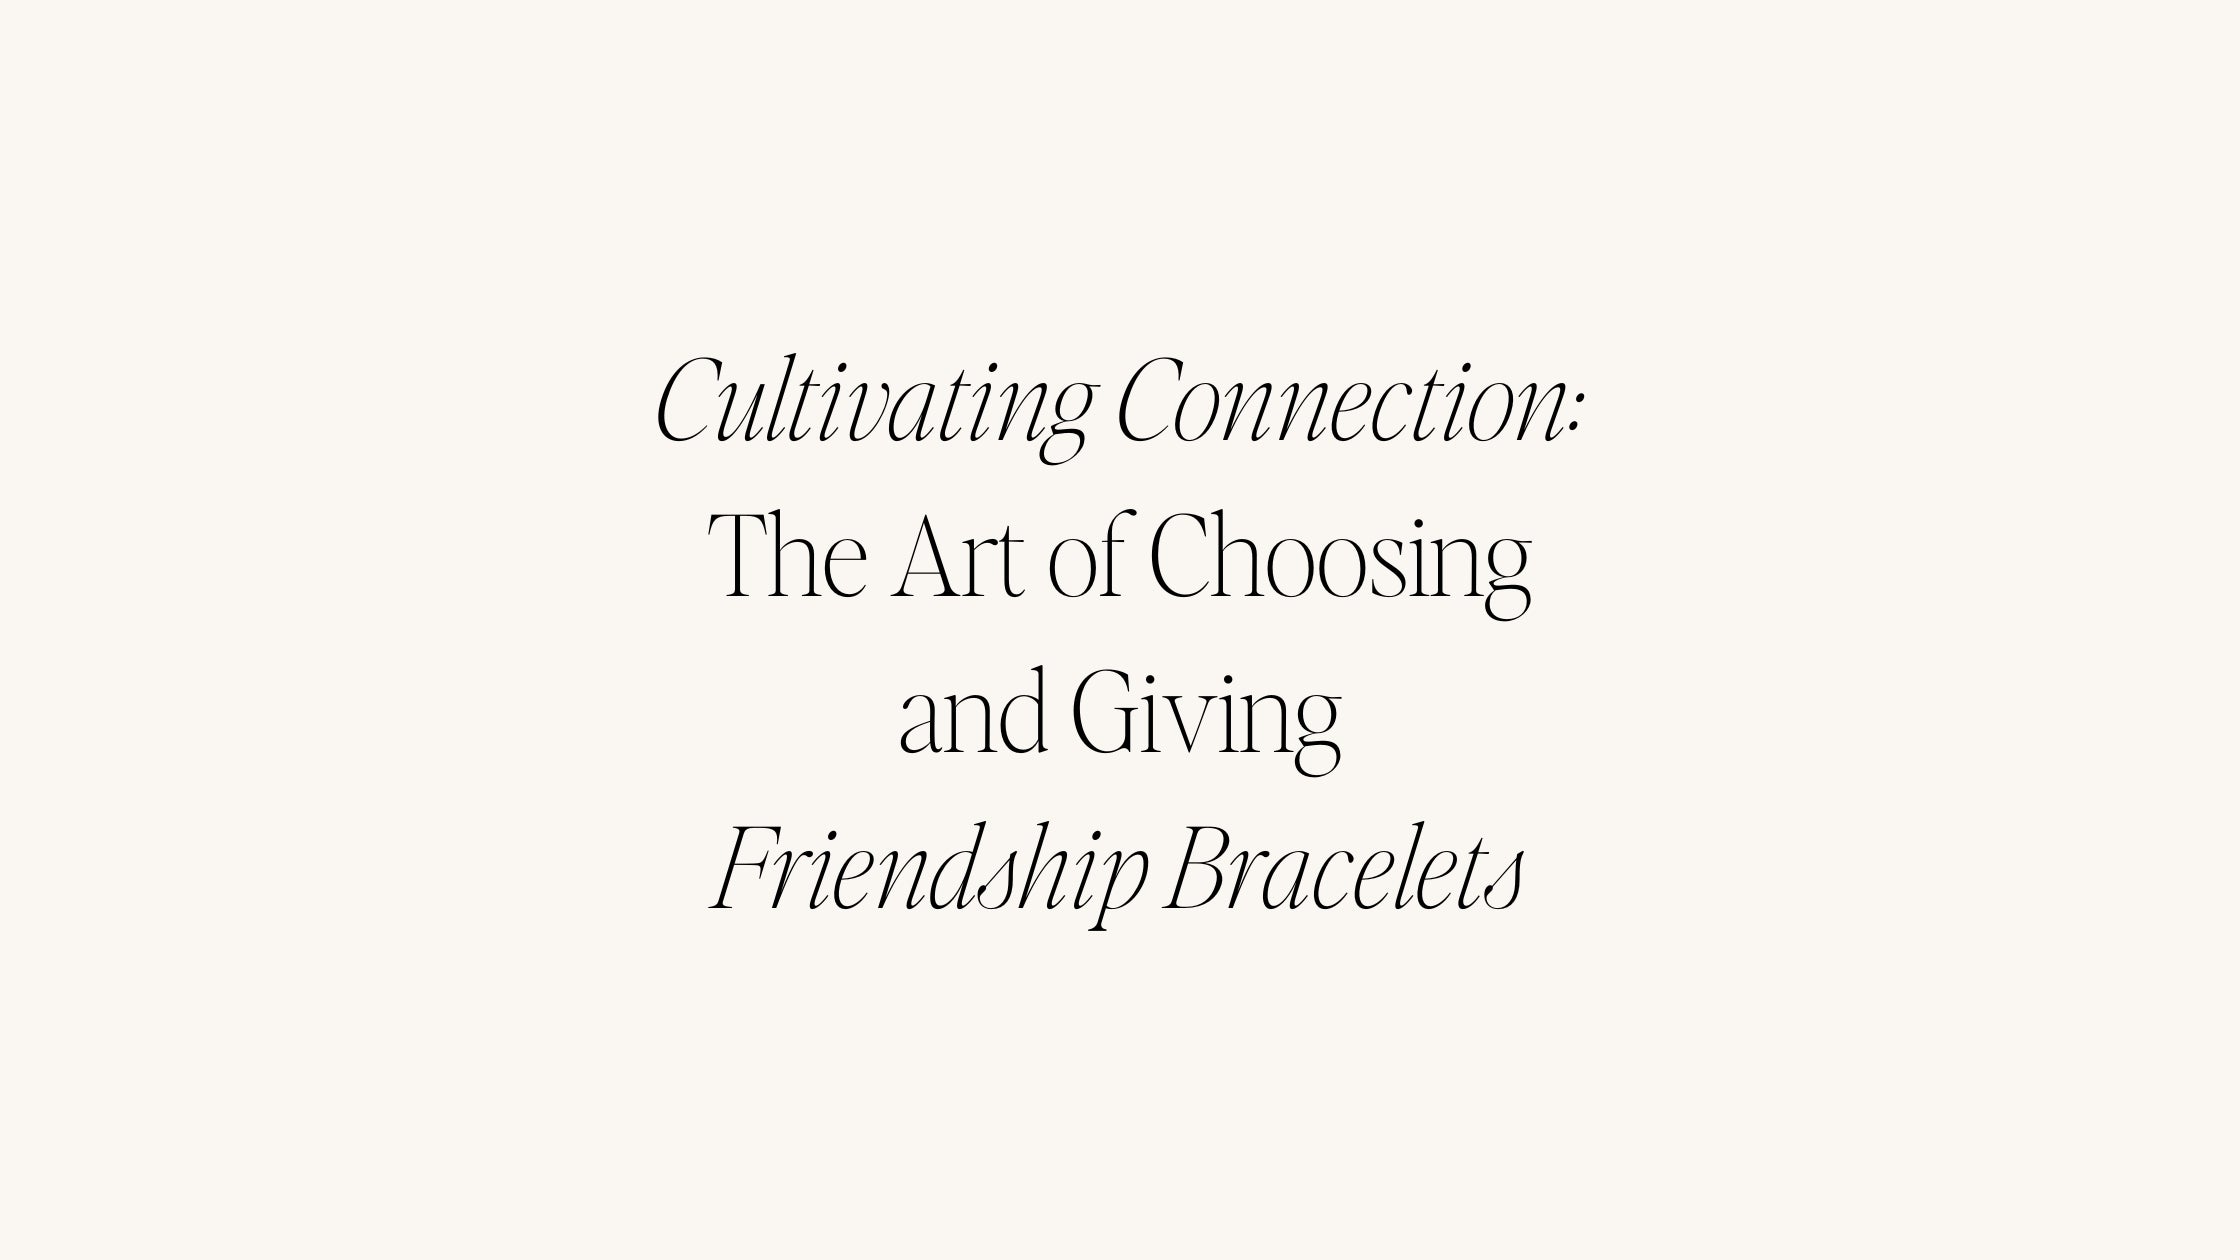 Cultivating Connection: The Art of Choosing and Giving Friendship Bracelets